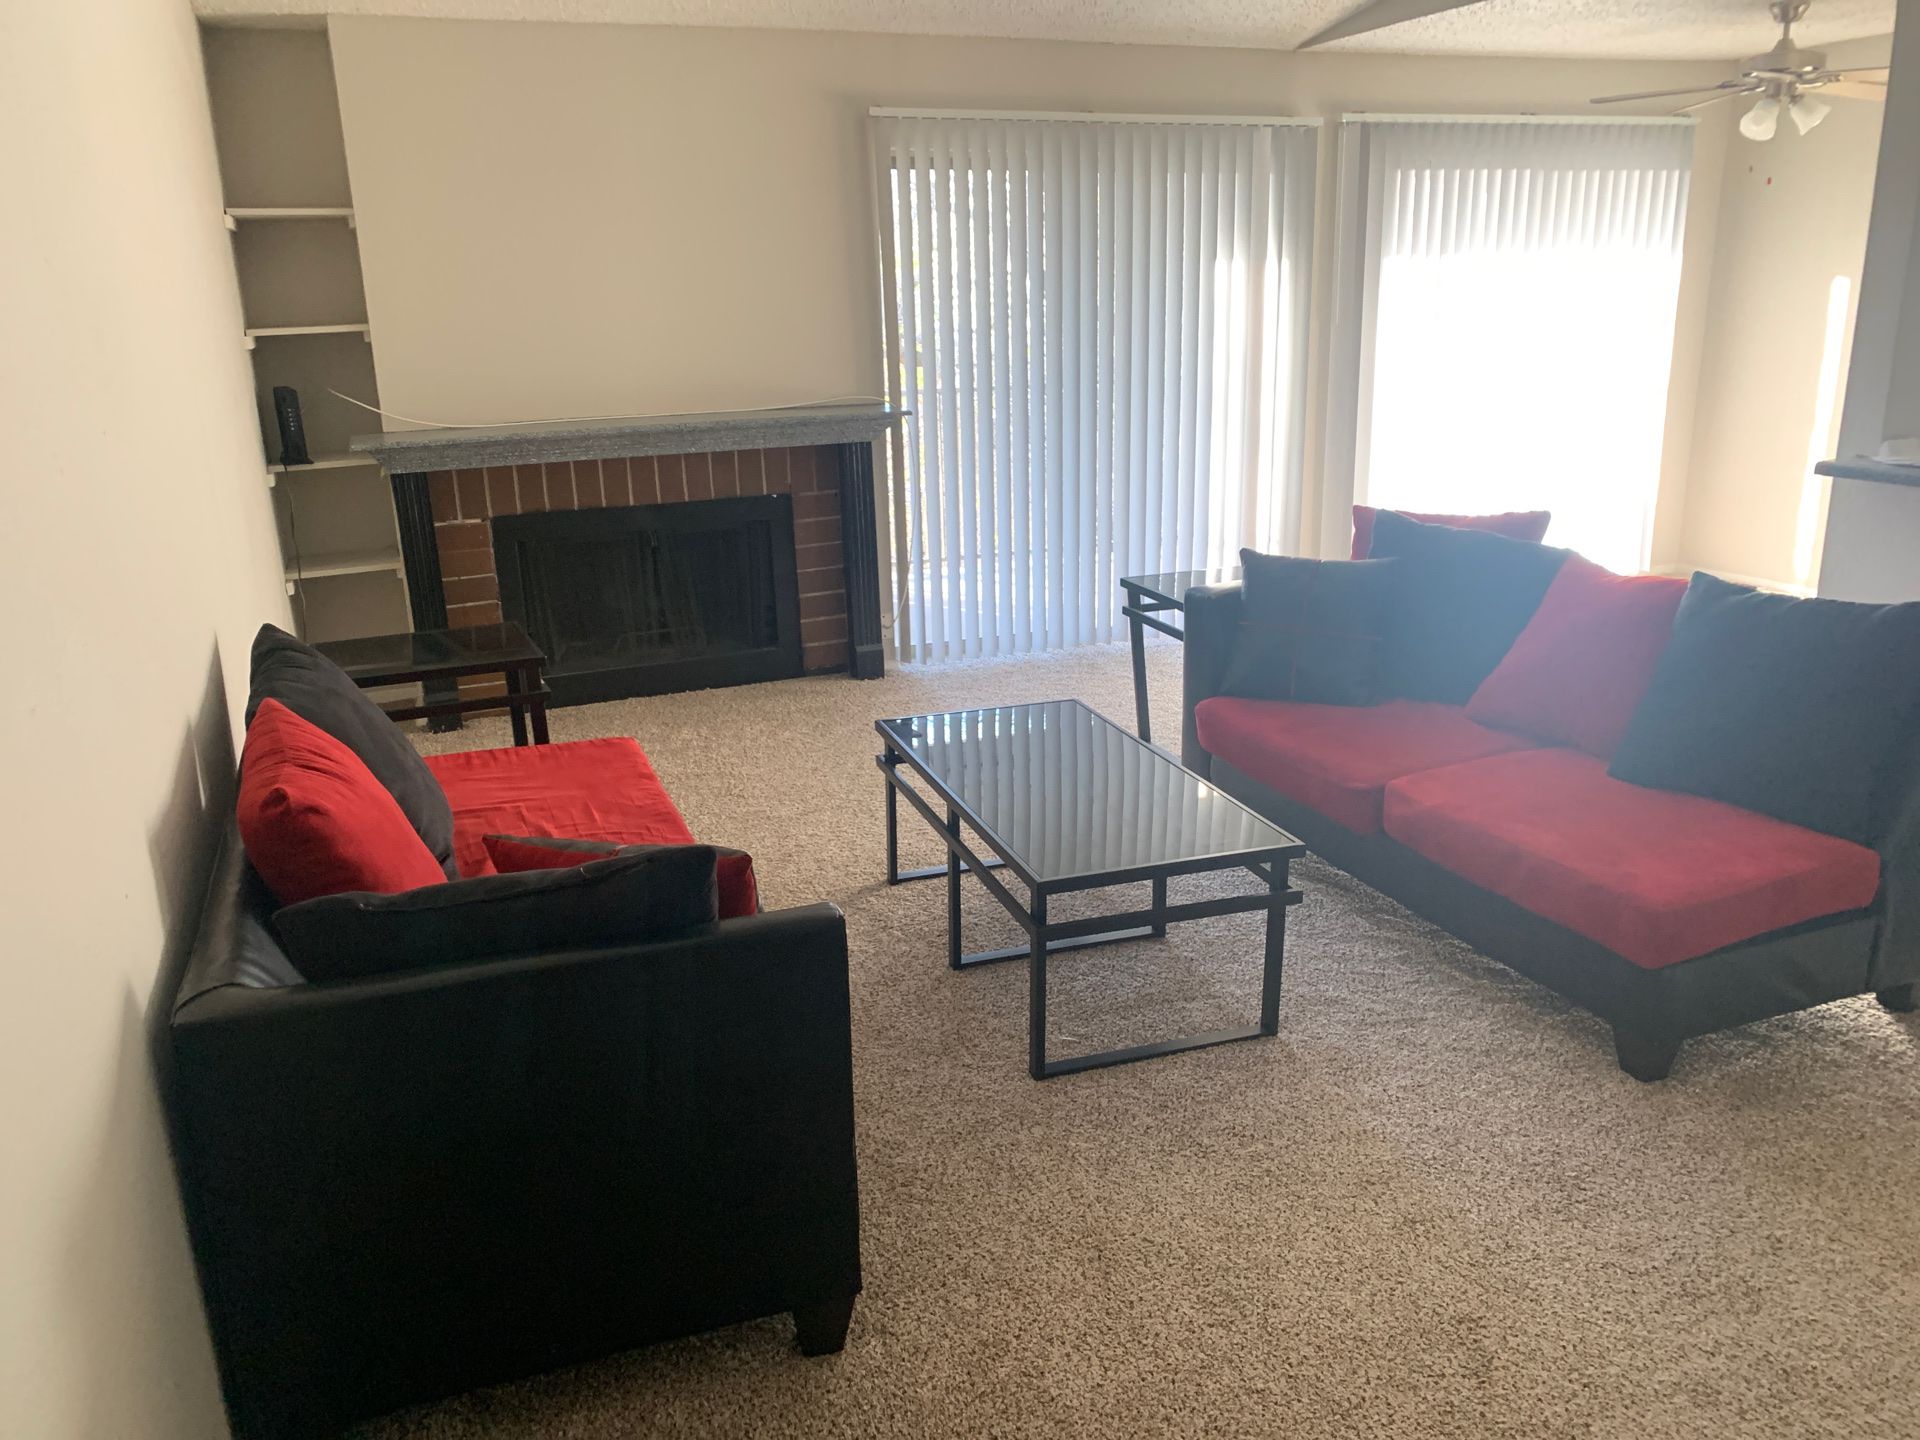 Red and black sectional living room set